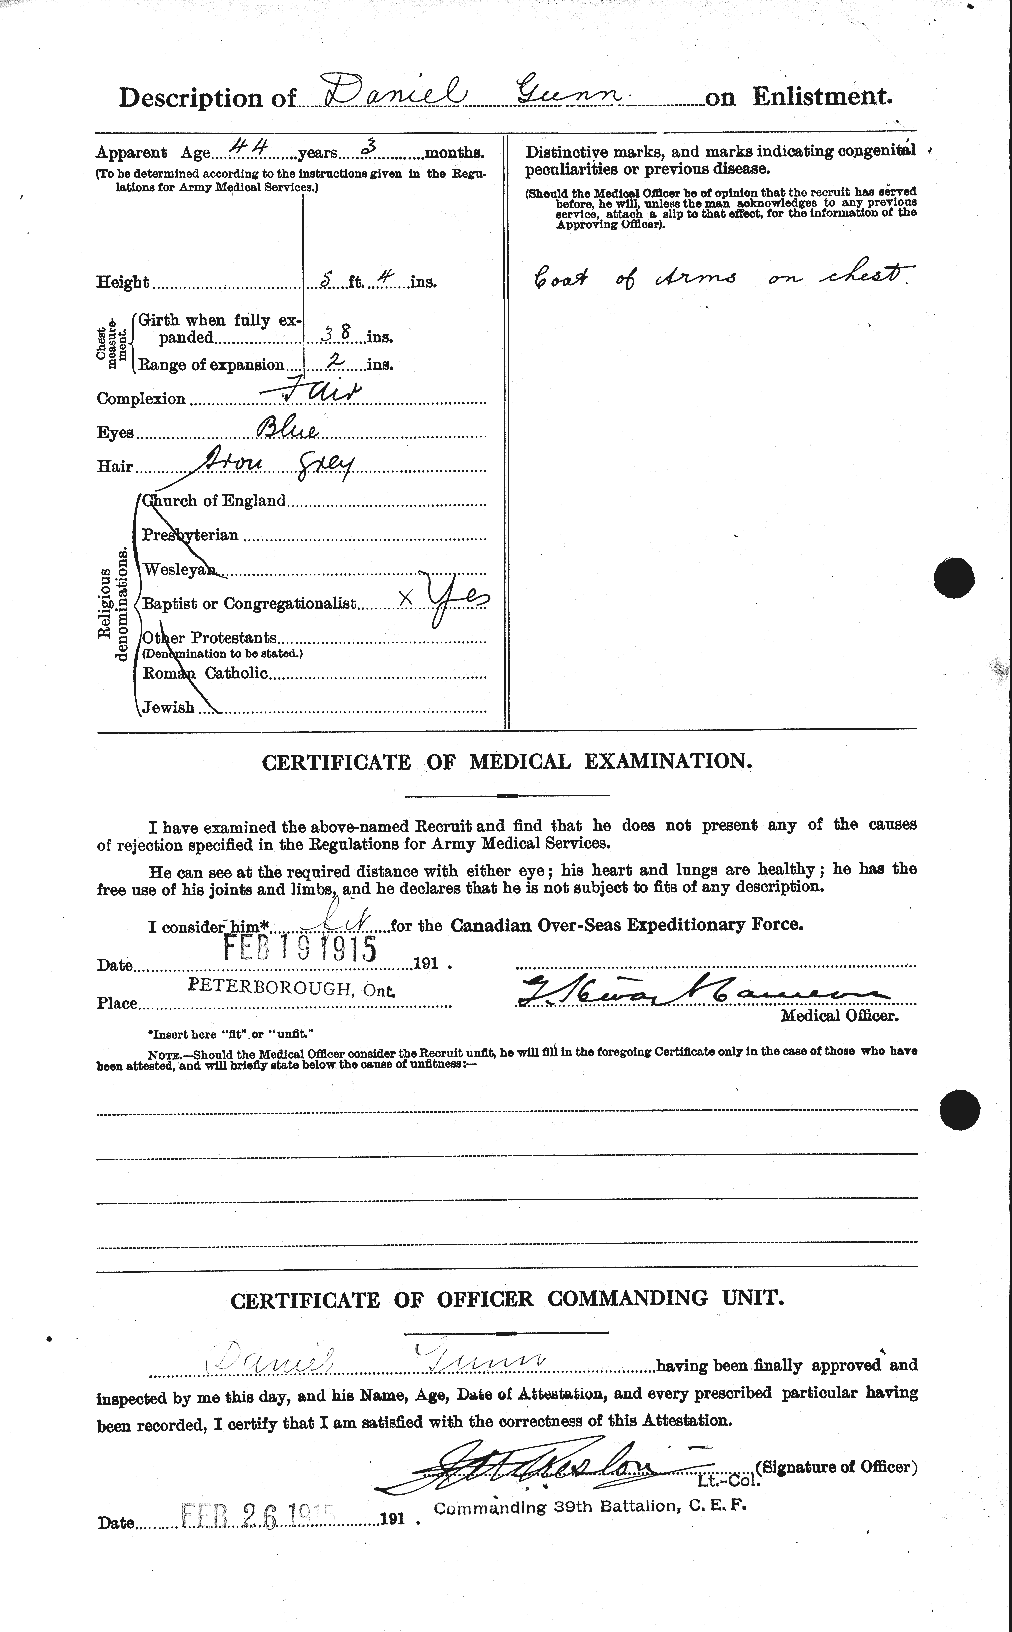 Personnel Records of the First World War - CEF 368015b